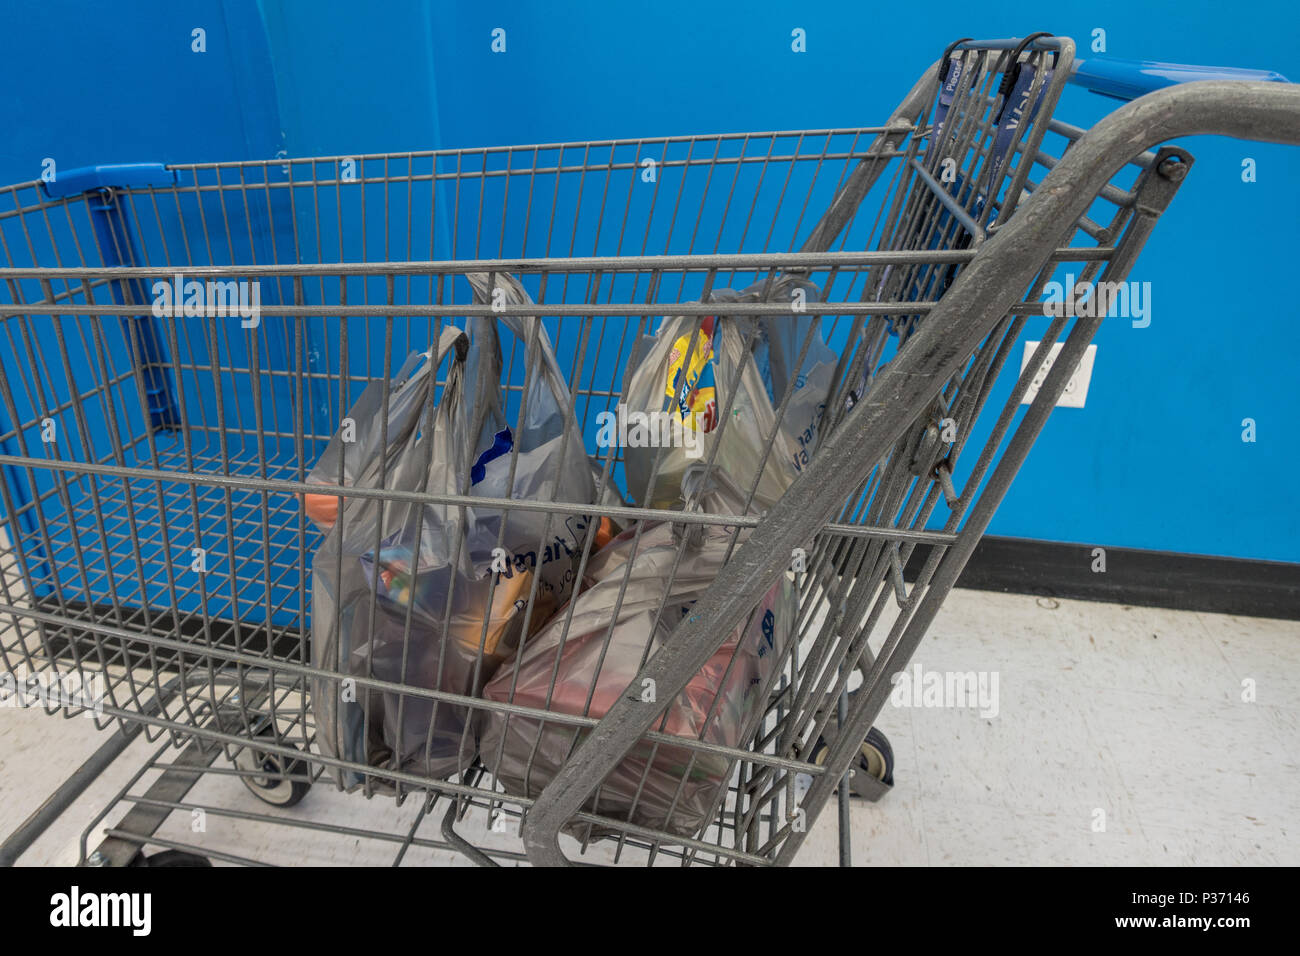 Grocery shopping in plastic shopping bags placed in a trolley in Walmart supermarket in Las Vegas, Nevada, USA Stock Photo